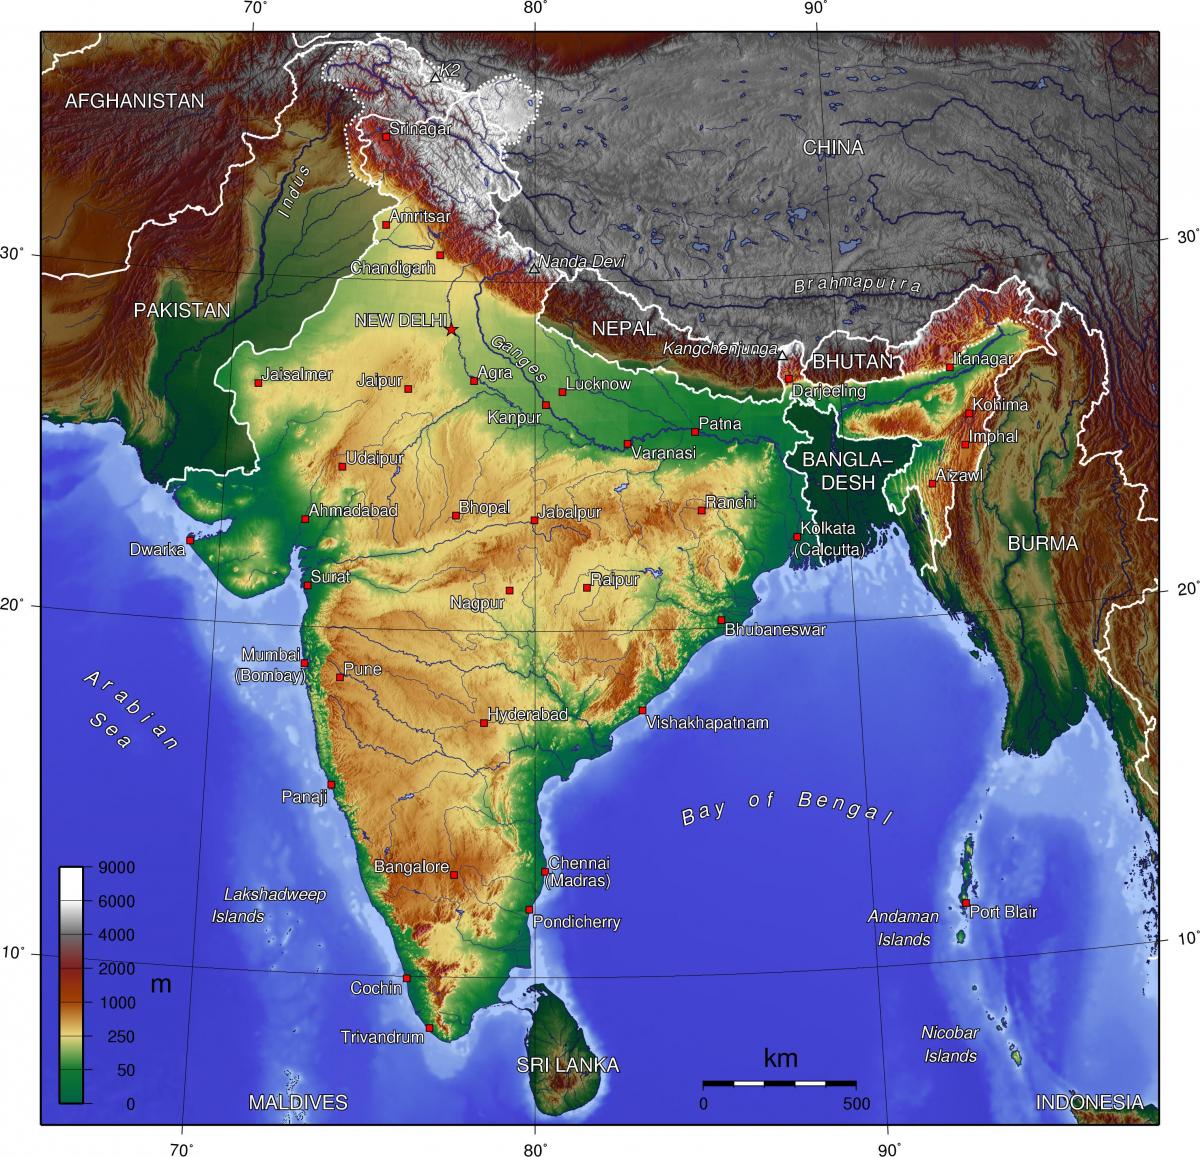 Topographical map of India